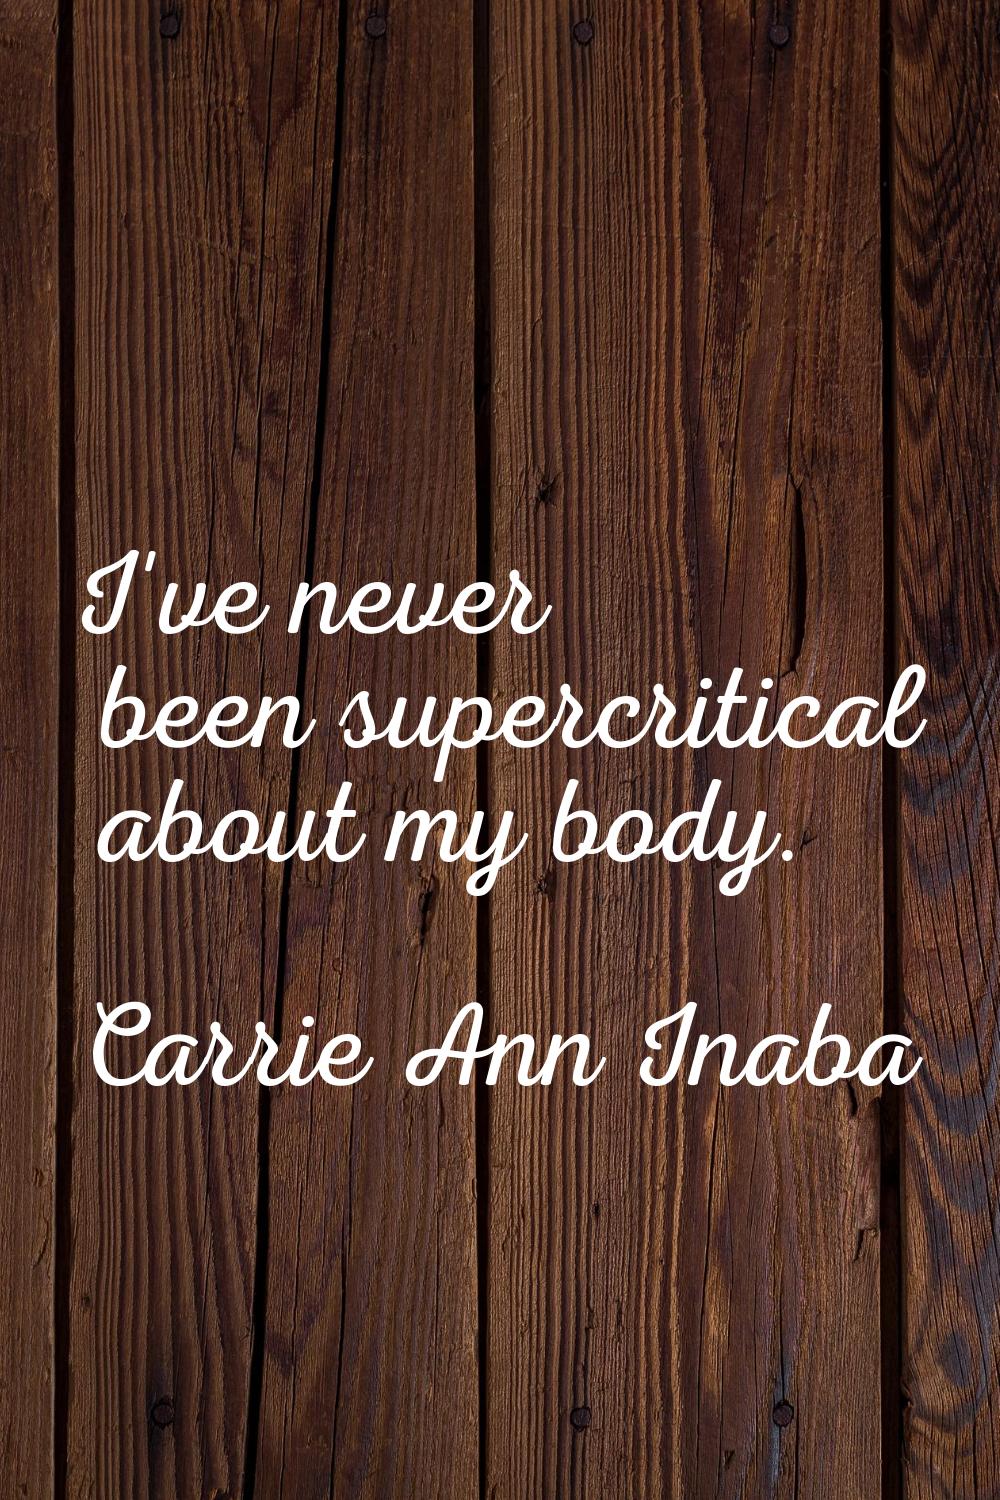 I've never been supercritical about my body.